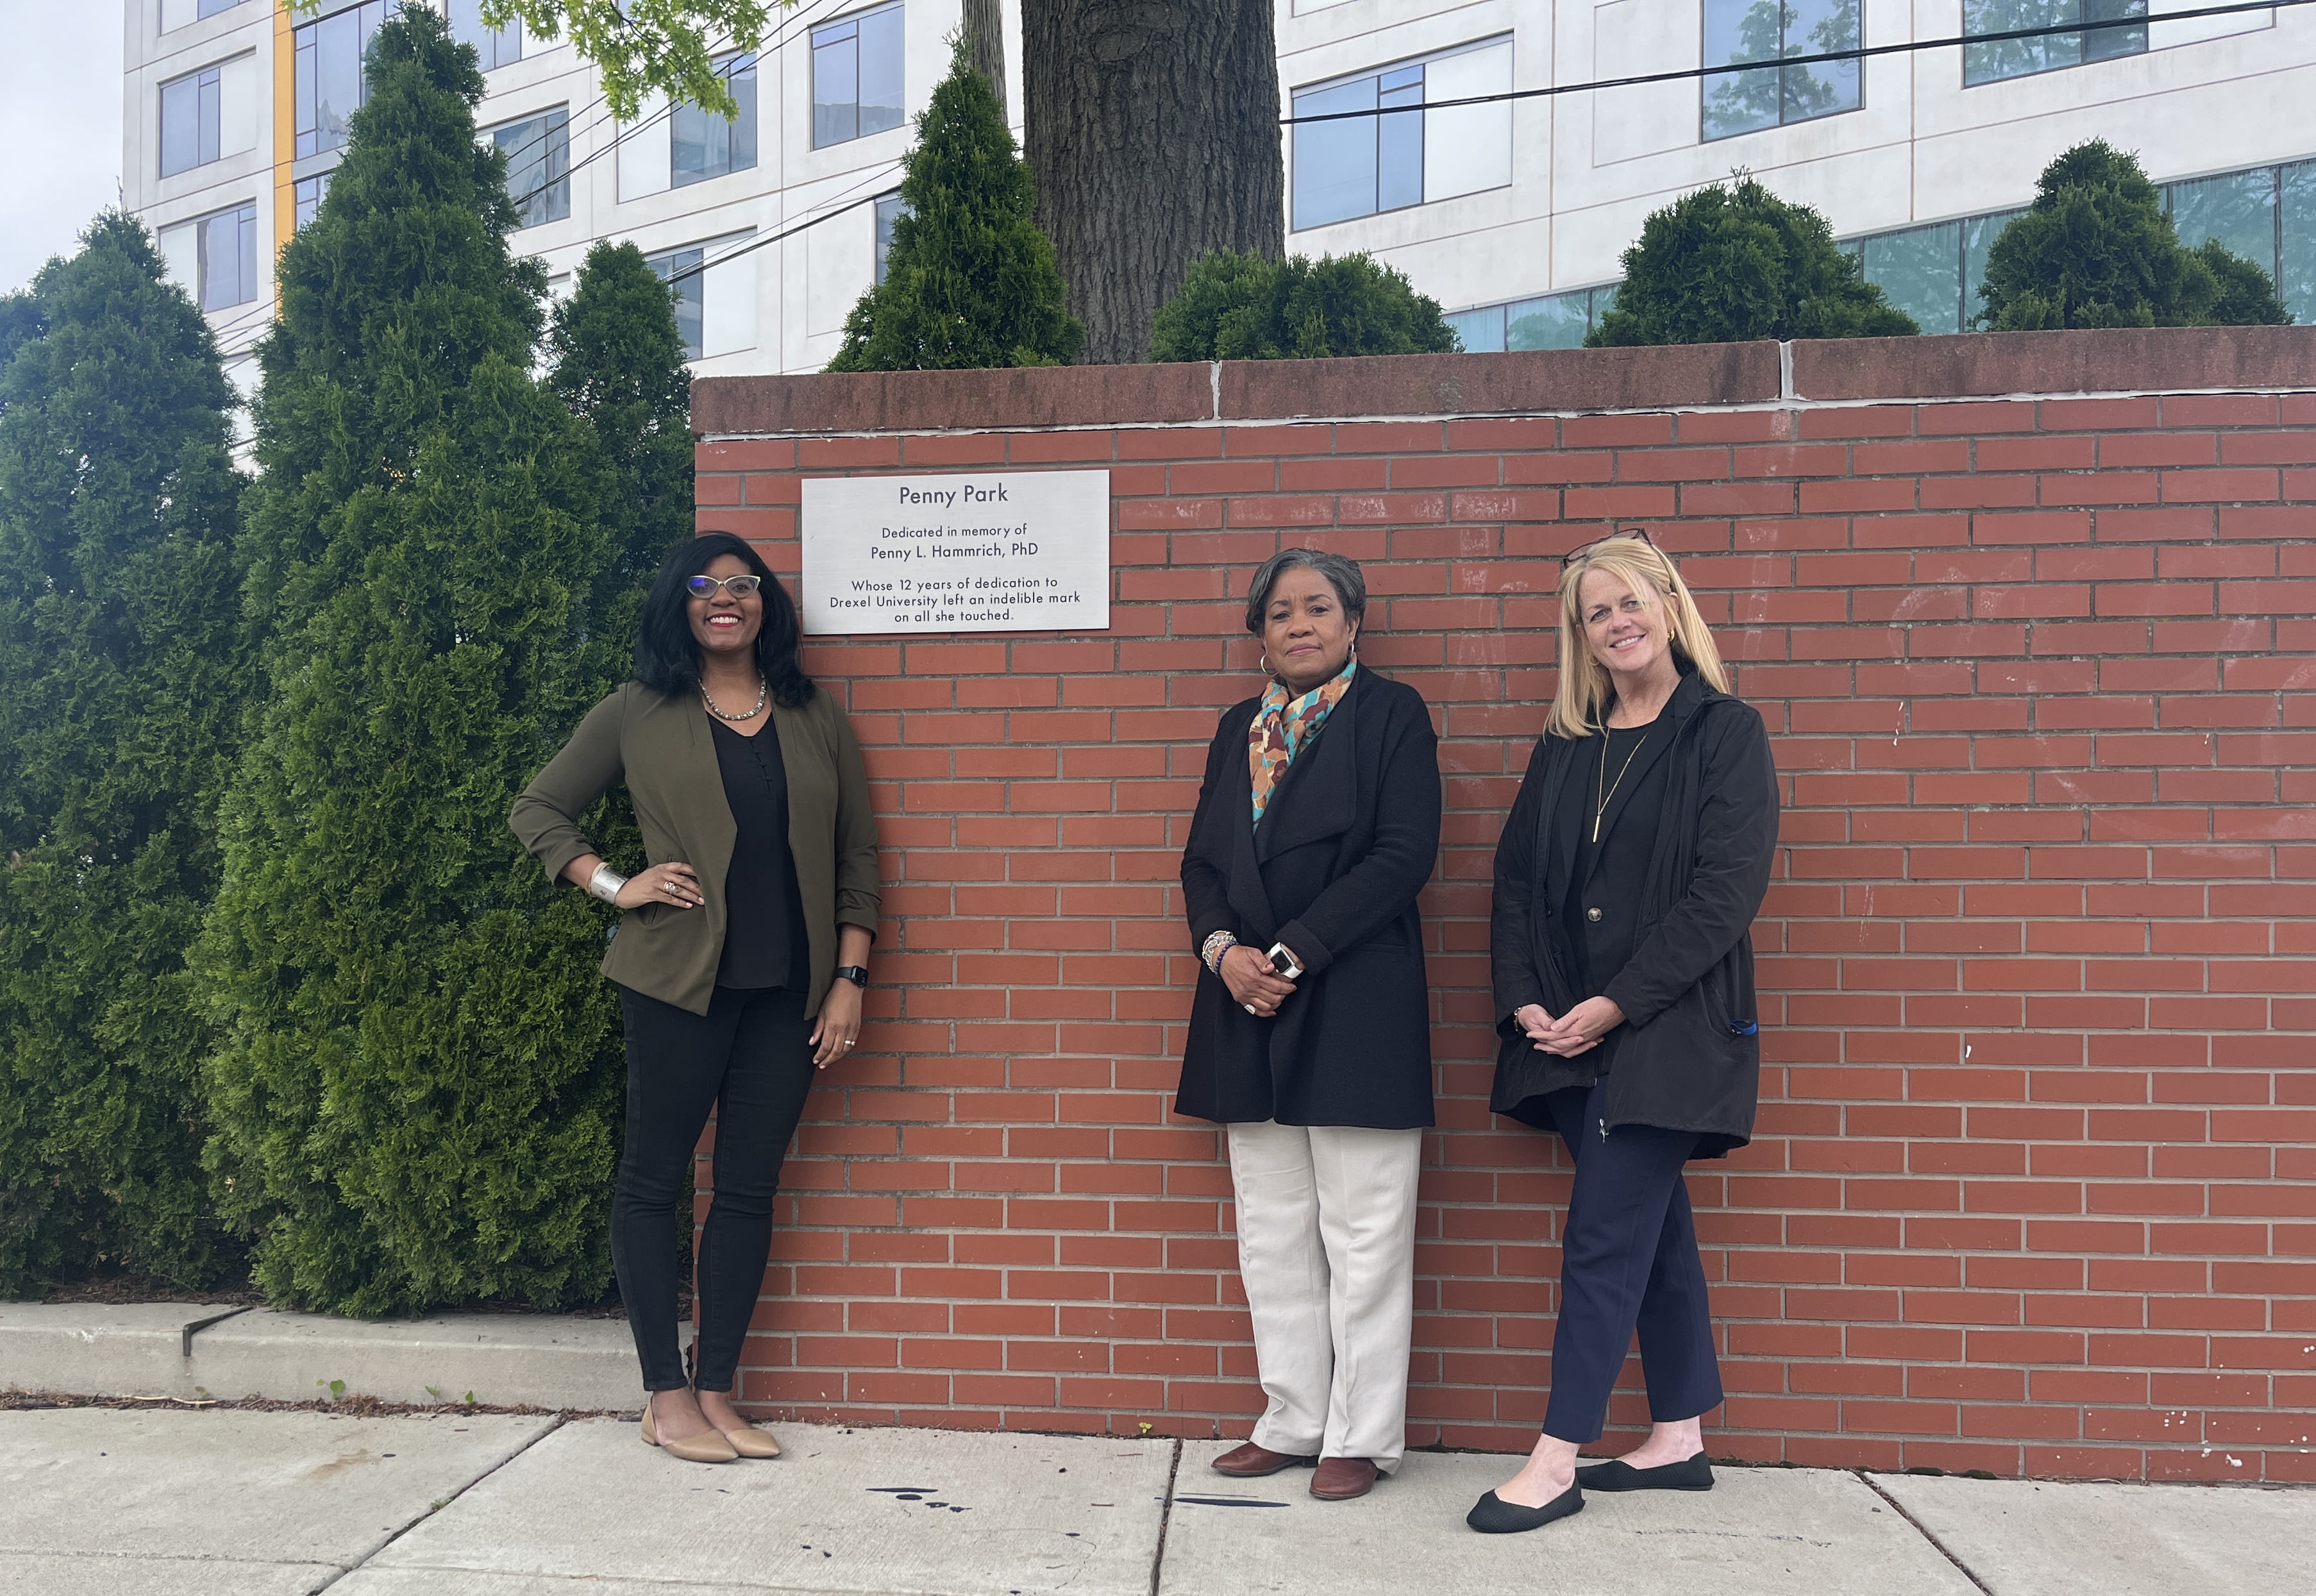 Three women stand in front of a brick wall with a plaque, next to trees.